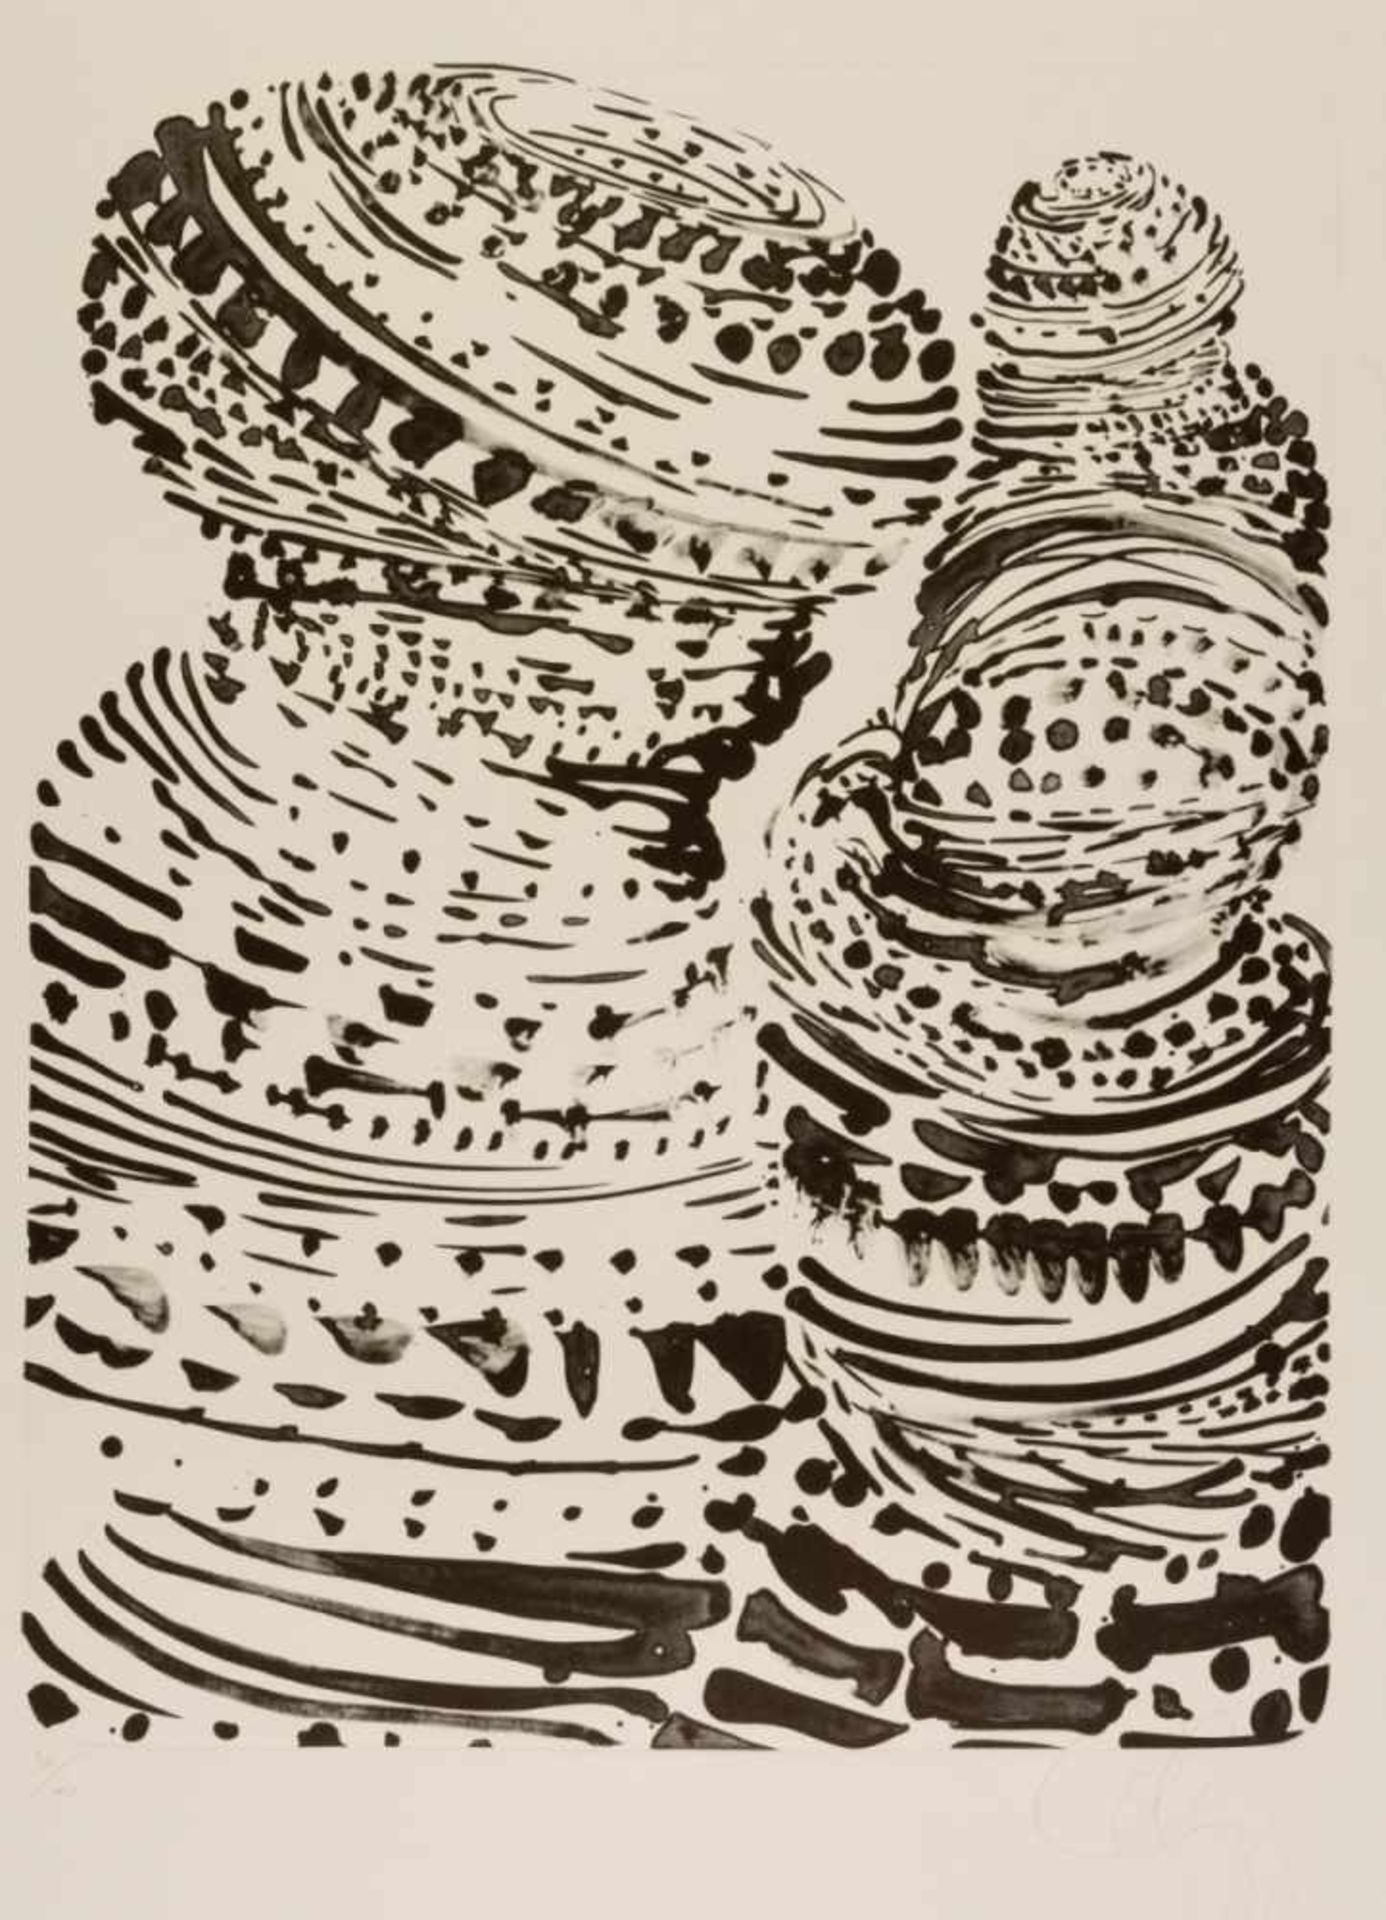 Tony CRAGG (1949), Identities, Very large lithography, 38/40, signed with pencil, 48 x 37cmTony